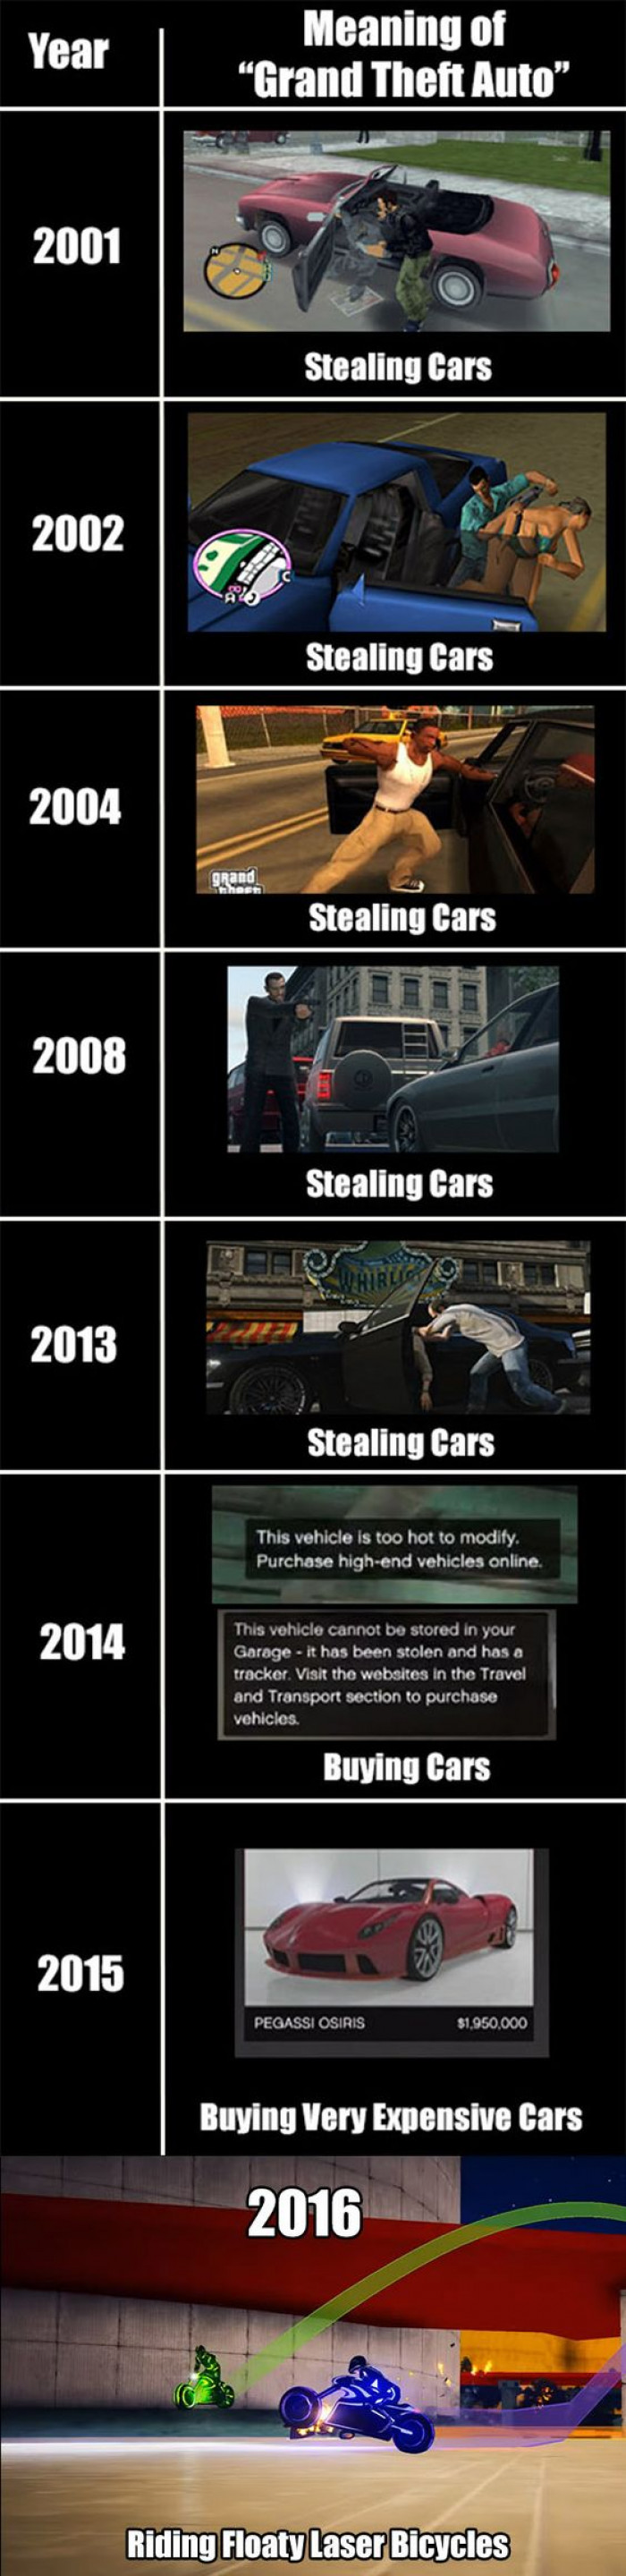 Meaning Of Grand Theft Auto Throughout The Years